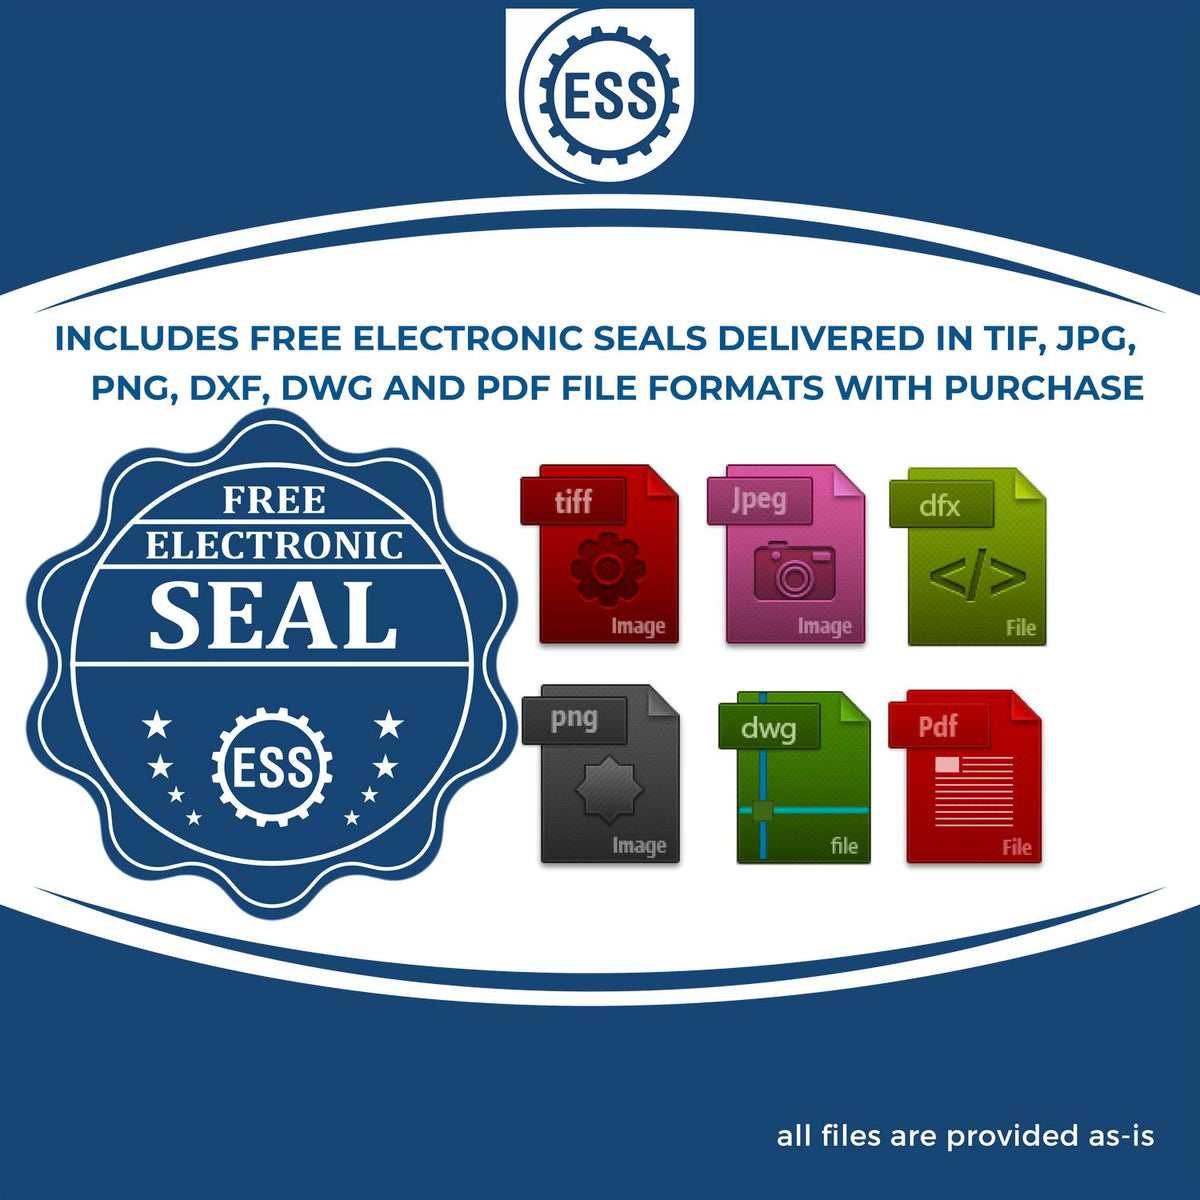 An infographic for the free electronic seal for the Handheld Mississippi Professional Geologist Embosser illustrating the different file type icons such as DXF, DWG, TIF, JPG and PNG.